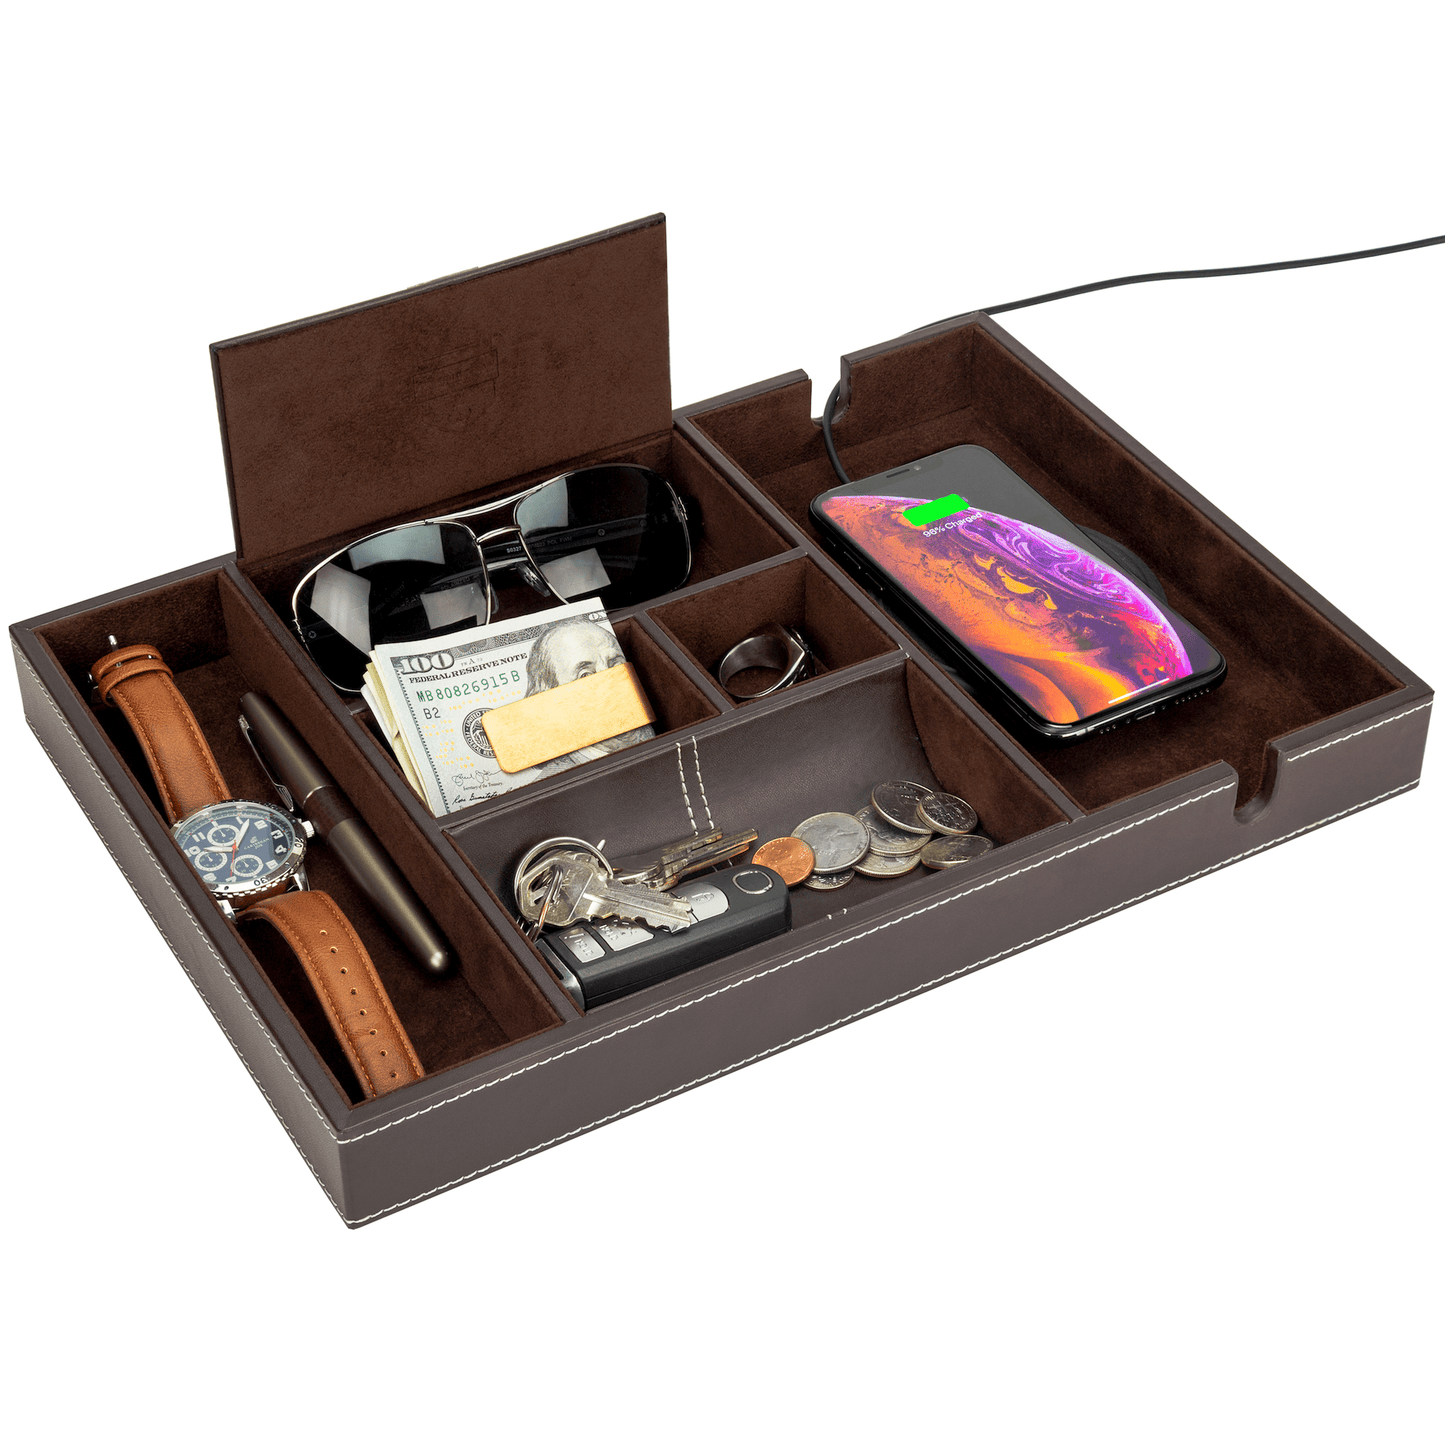 HOUNDSBAY Valet Organizer Brown Brown The Victory - Valet Tray for Men with Large Smartphone Charging Station